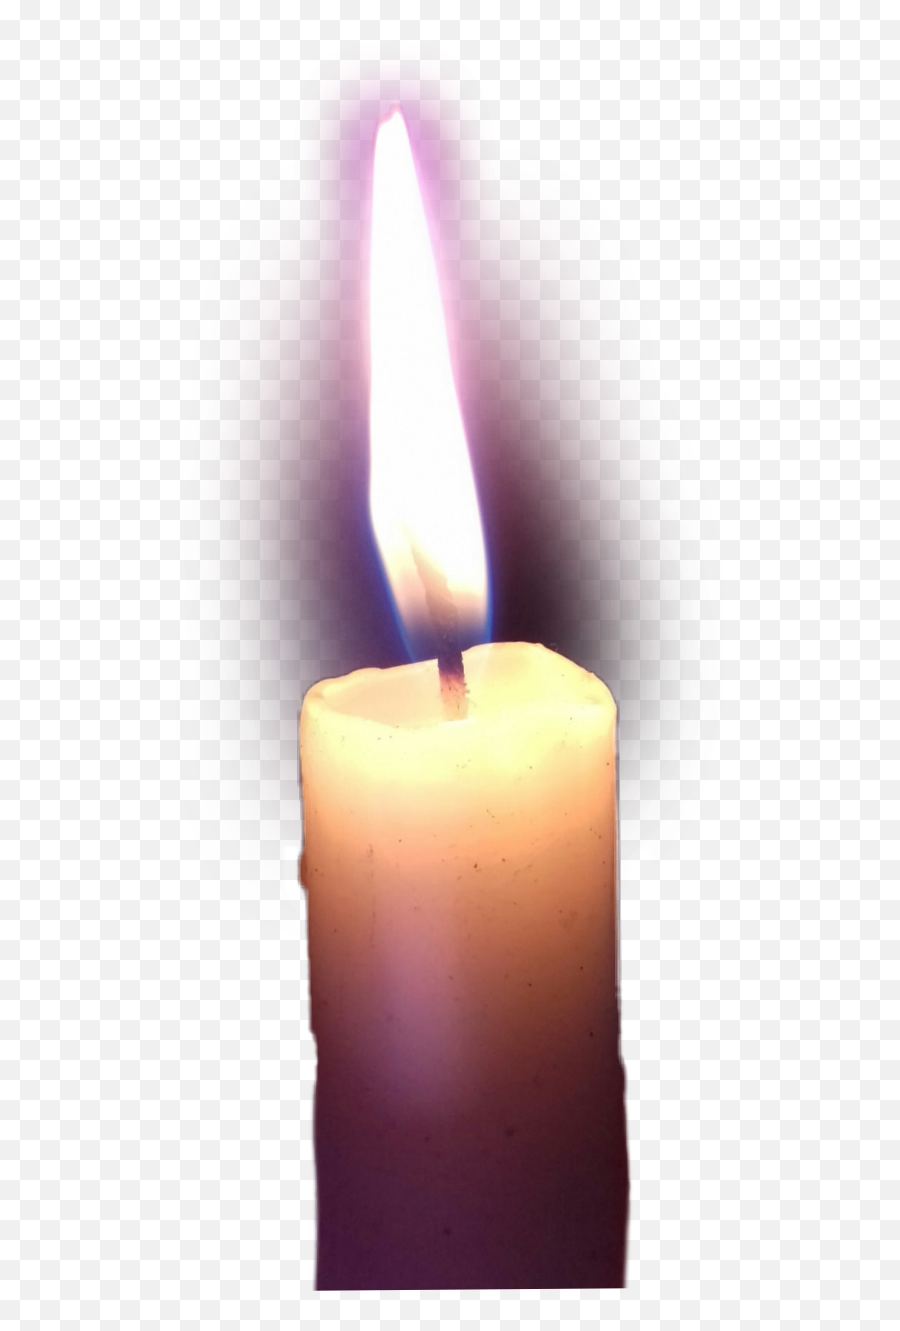 Candle Flame Lit Dark Light Made From - Advent Candle Emoji,Emoji Candle